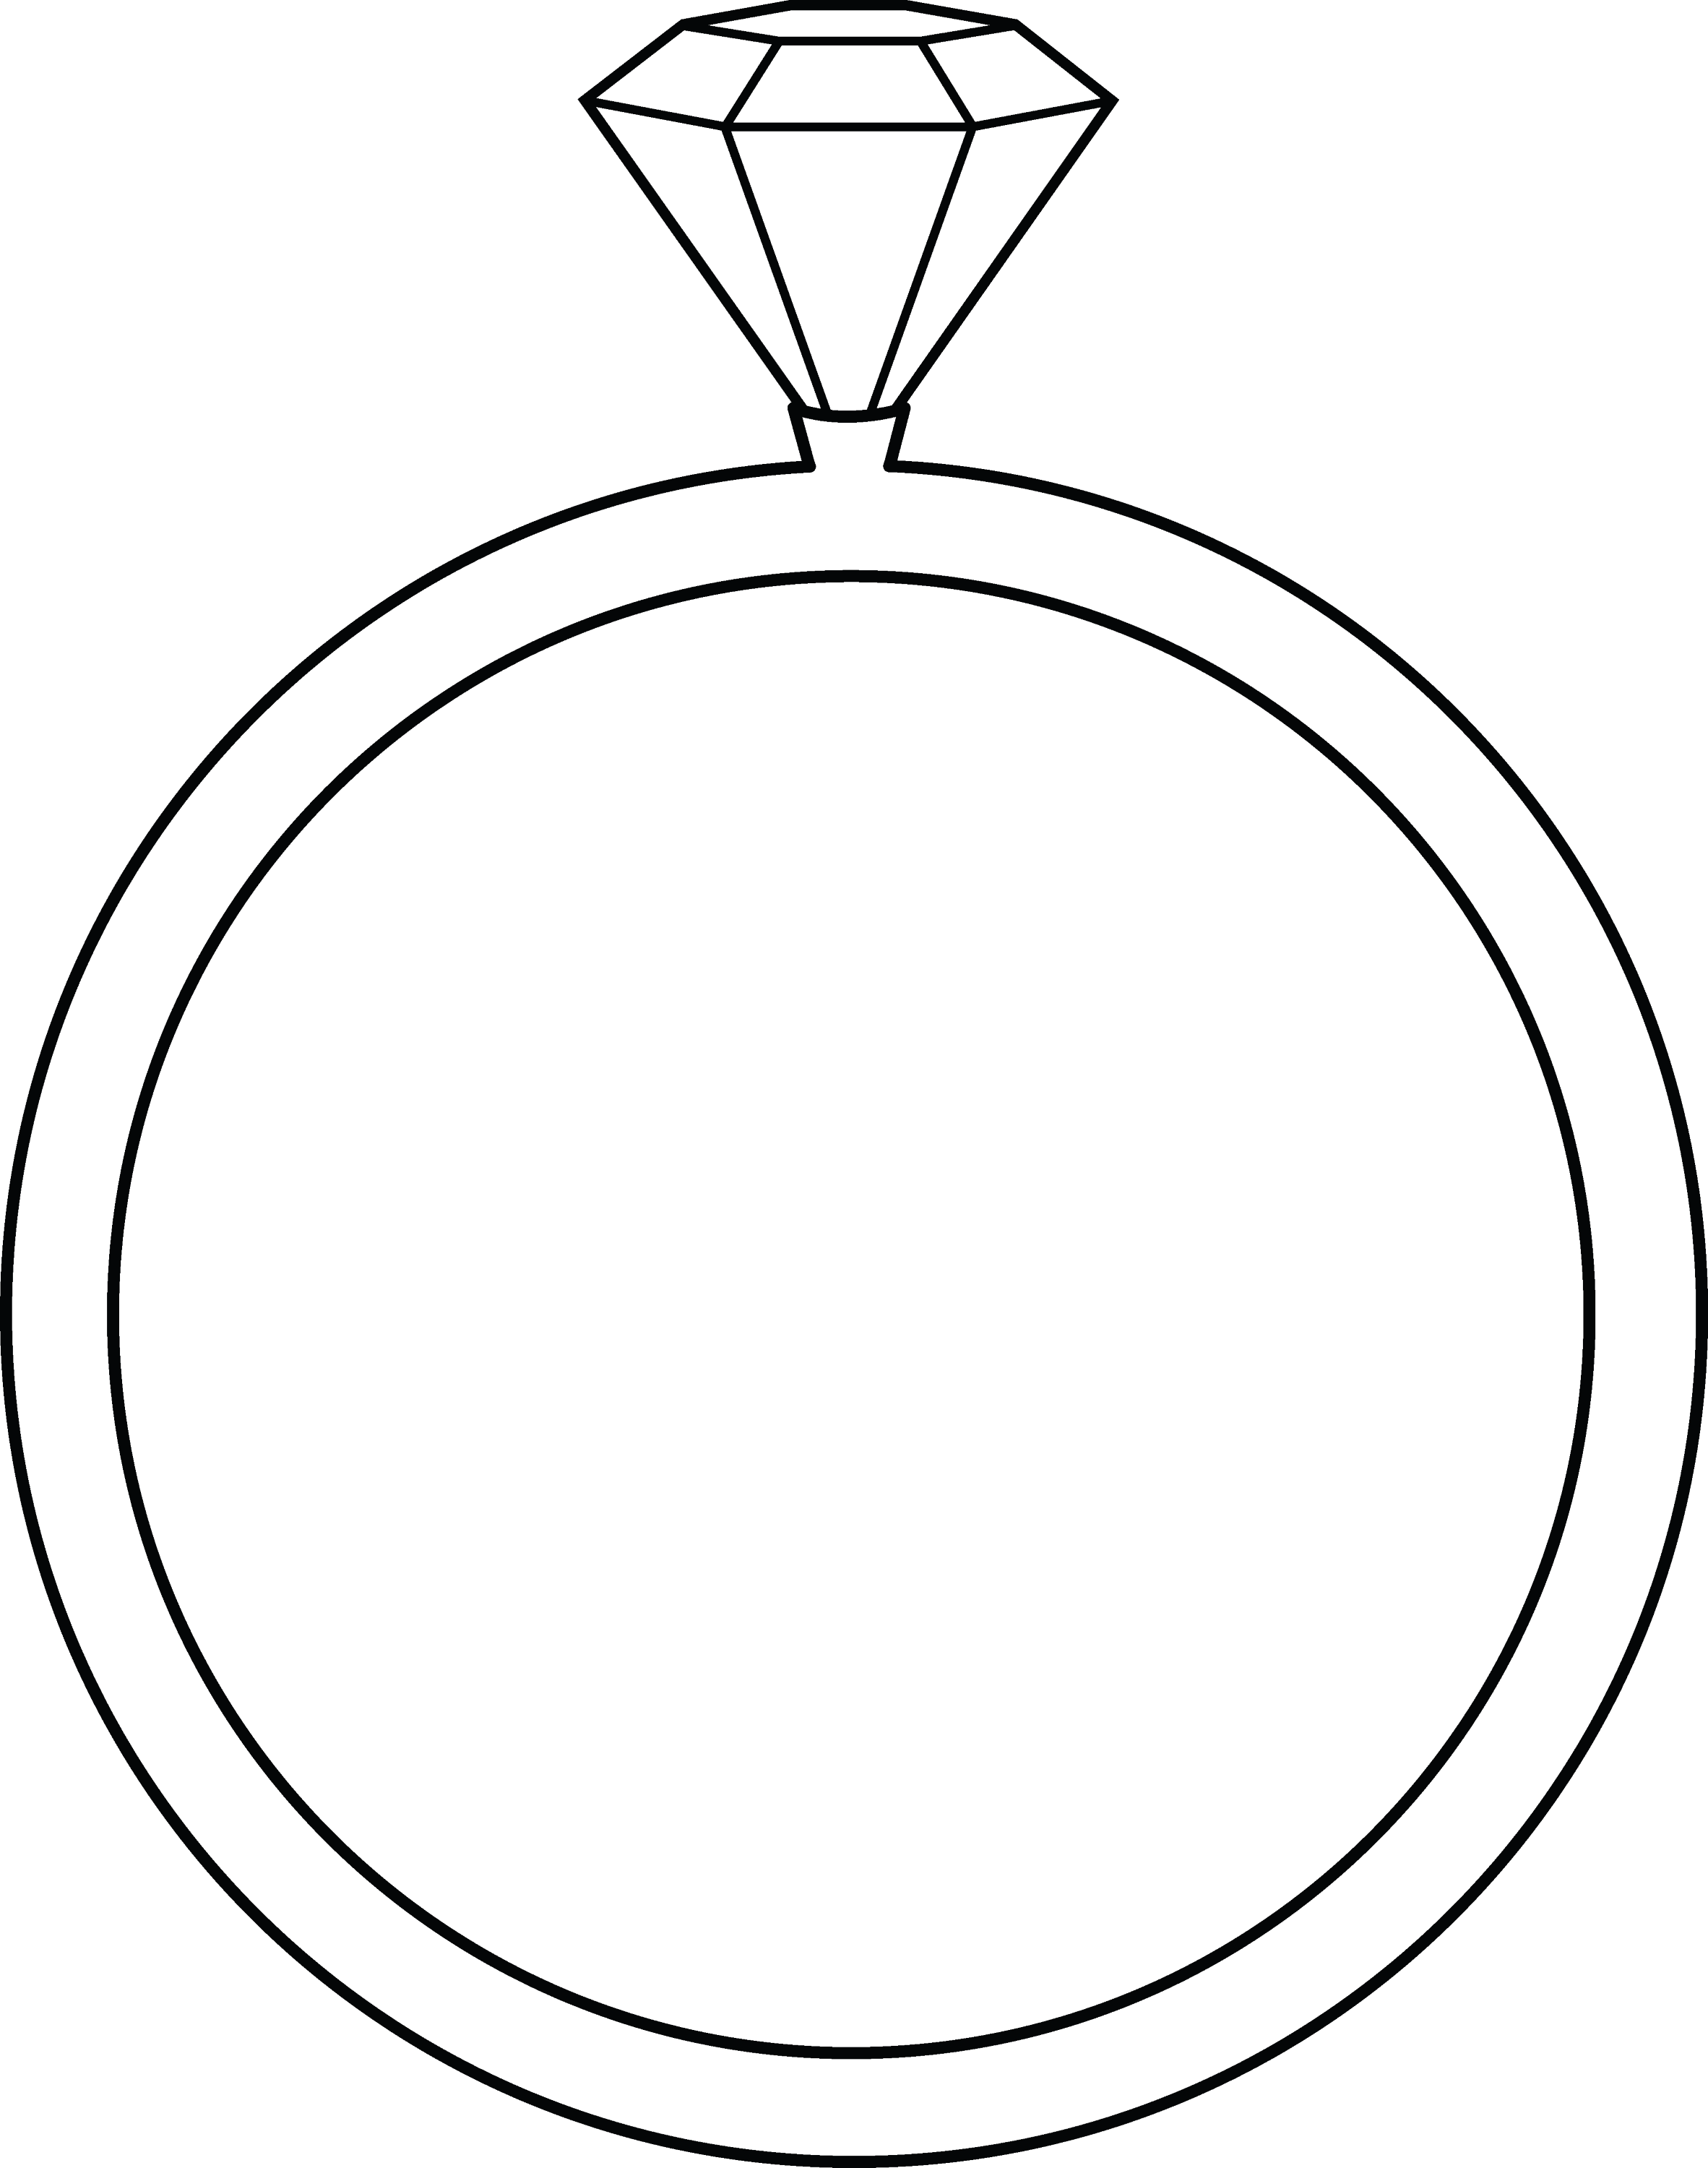 ring clipart black and white - photo #11